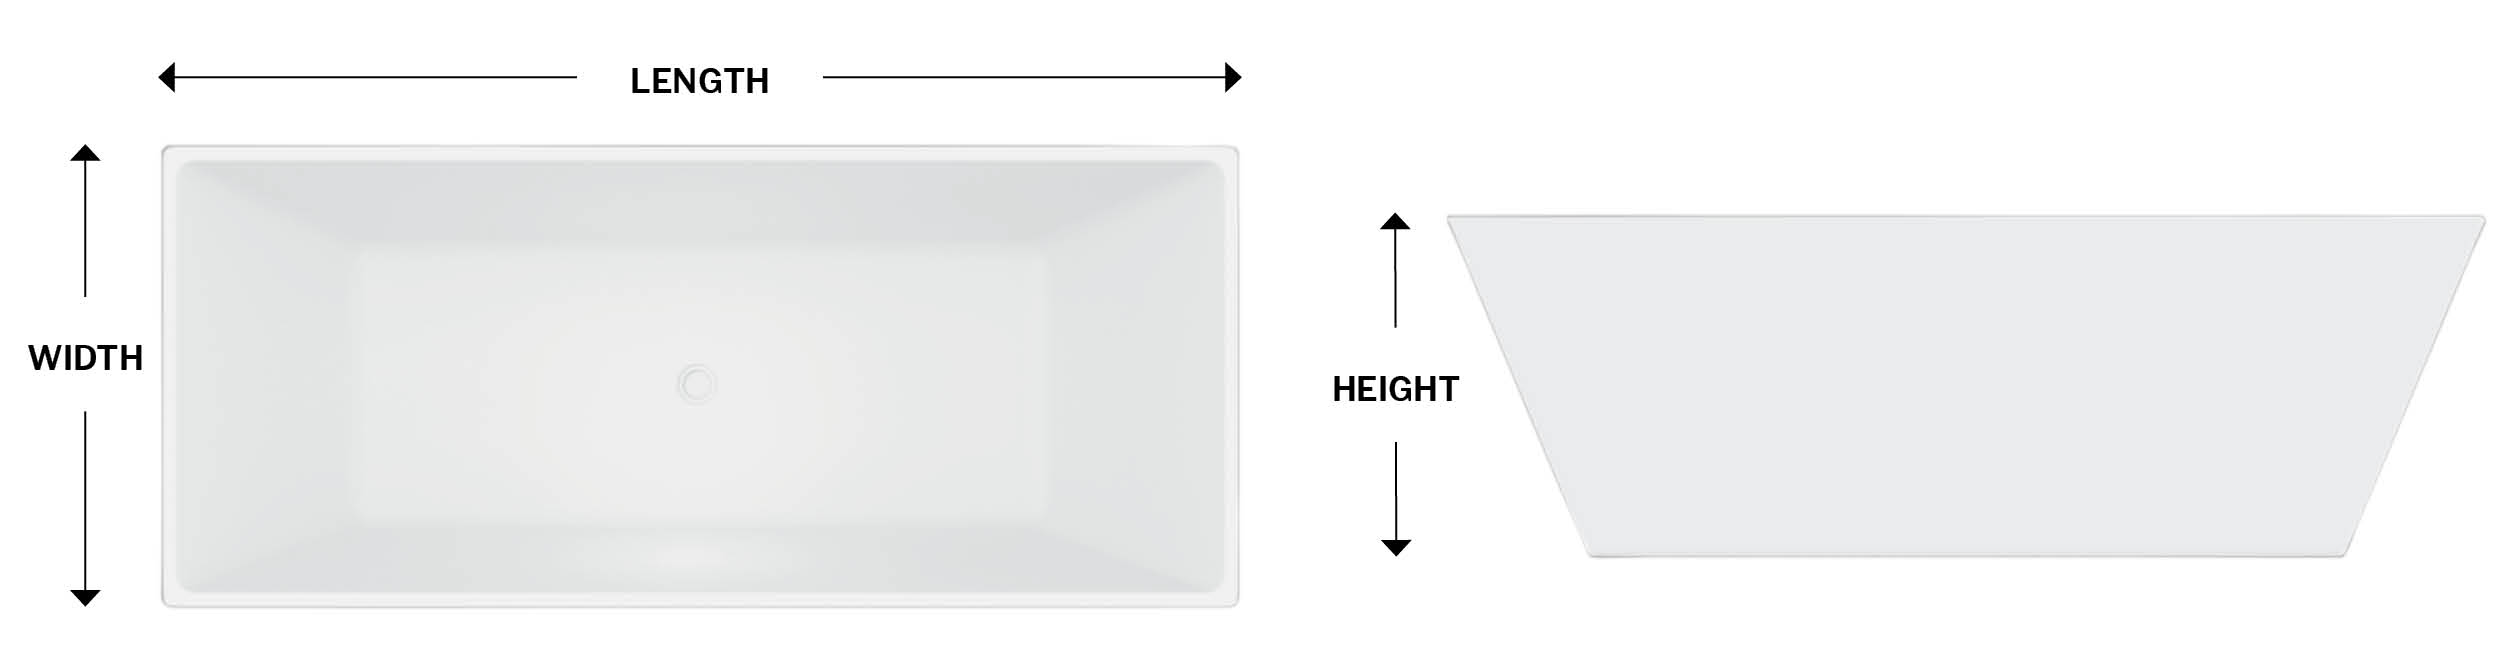 Measurements of a bathtub to show how to measure its height, width and length